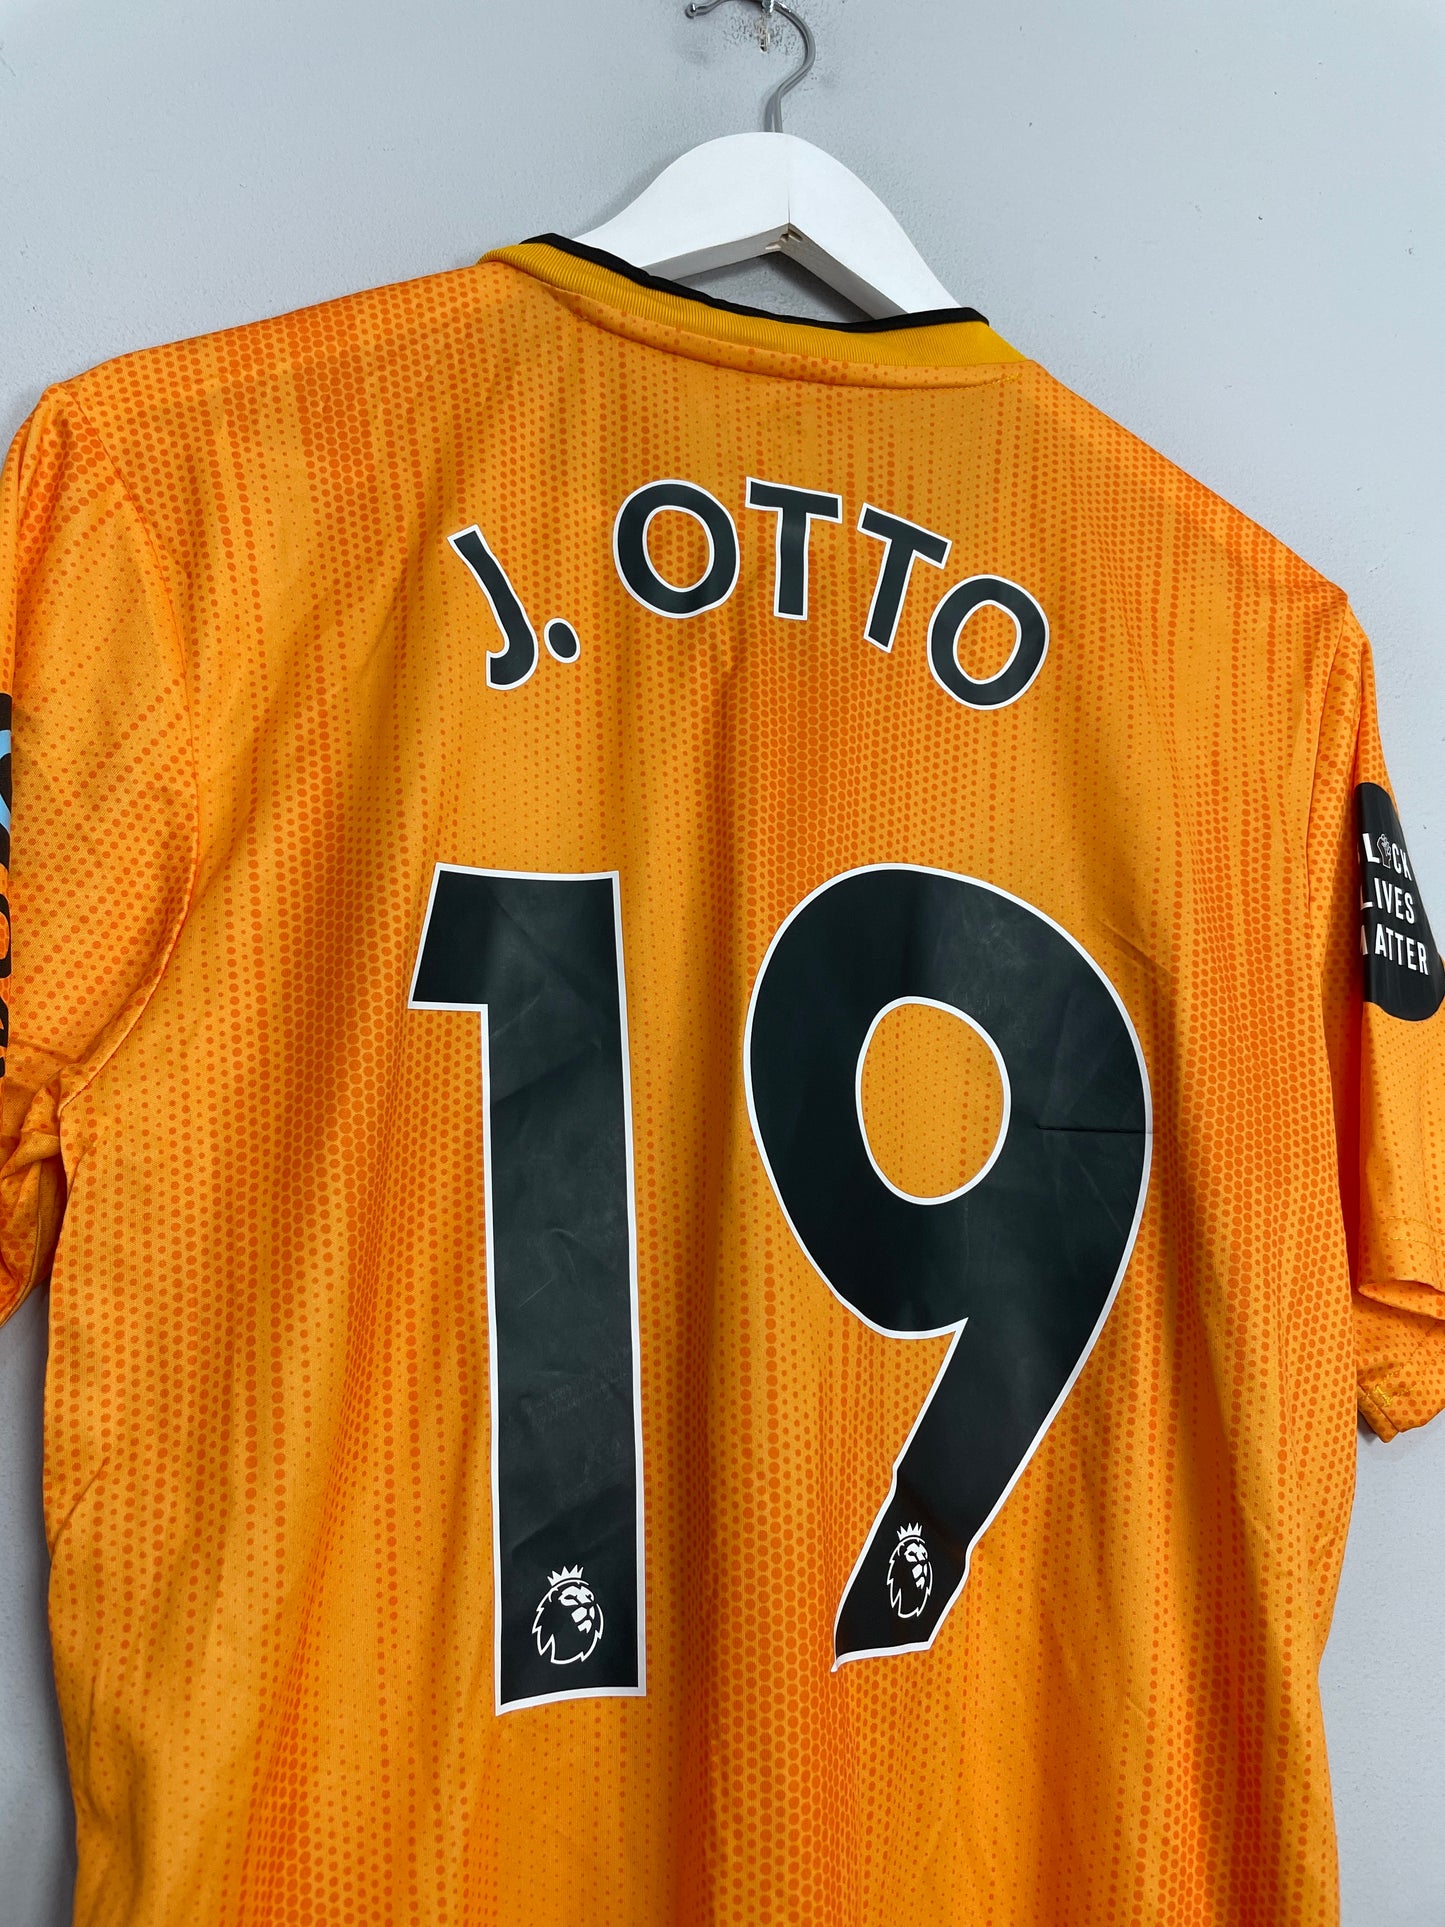 2019/20 WOLVES J.OTTO #19 *MATCH ISSUE* HOME SHIRT (M) ADIDAS